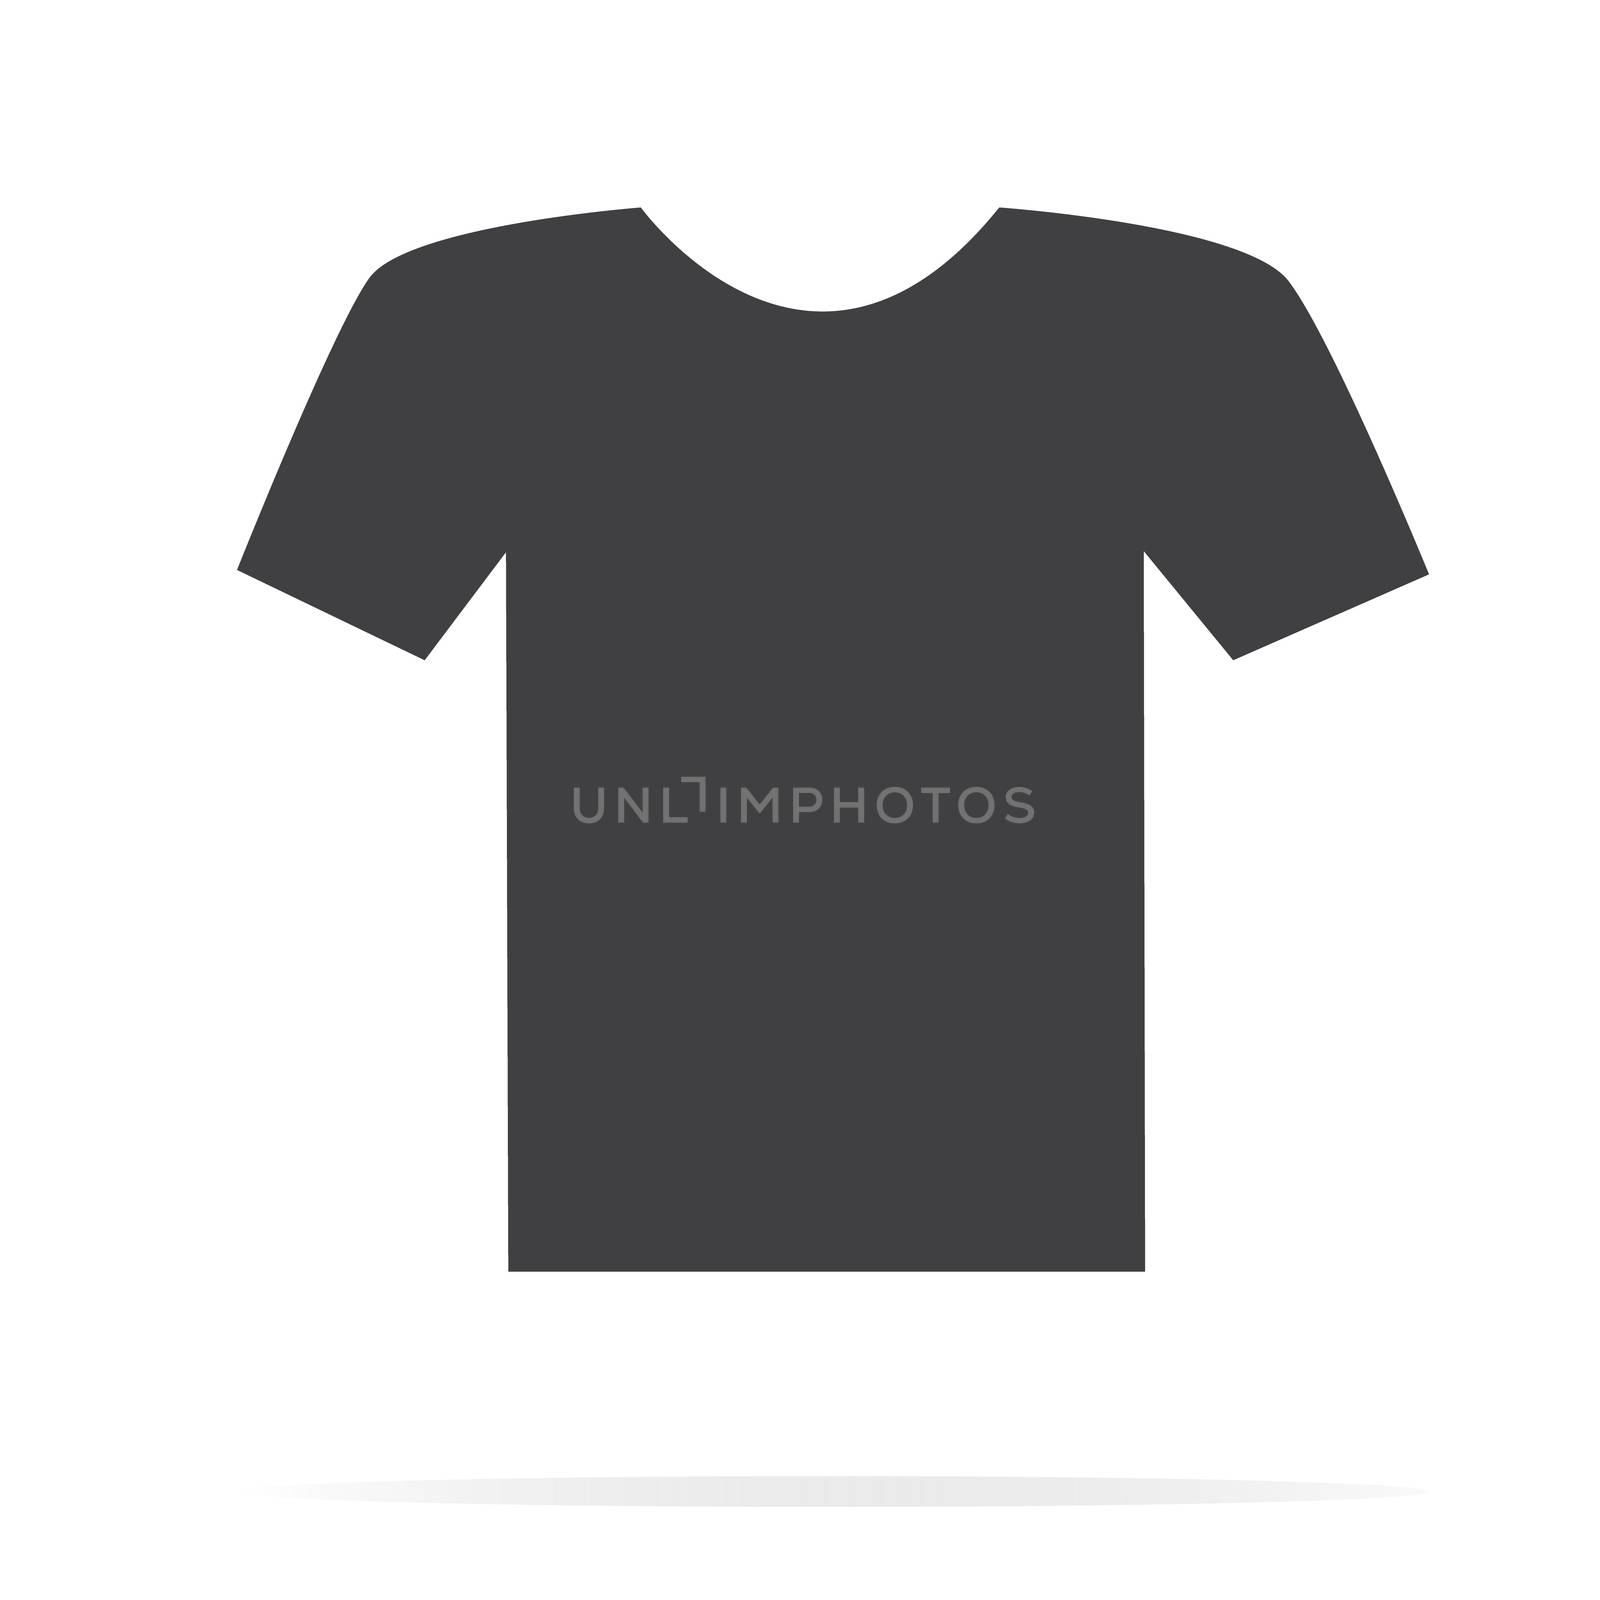 T-shirt Icon on white background. T-shirt Icon sign. T-shirt ico by suthee